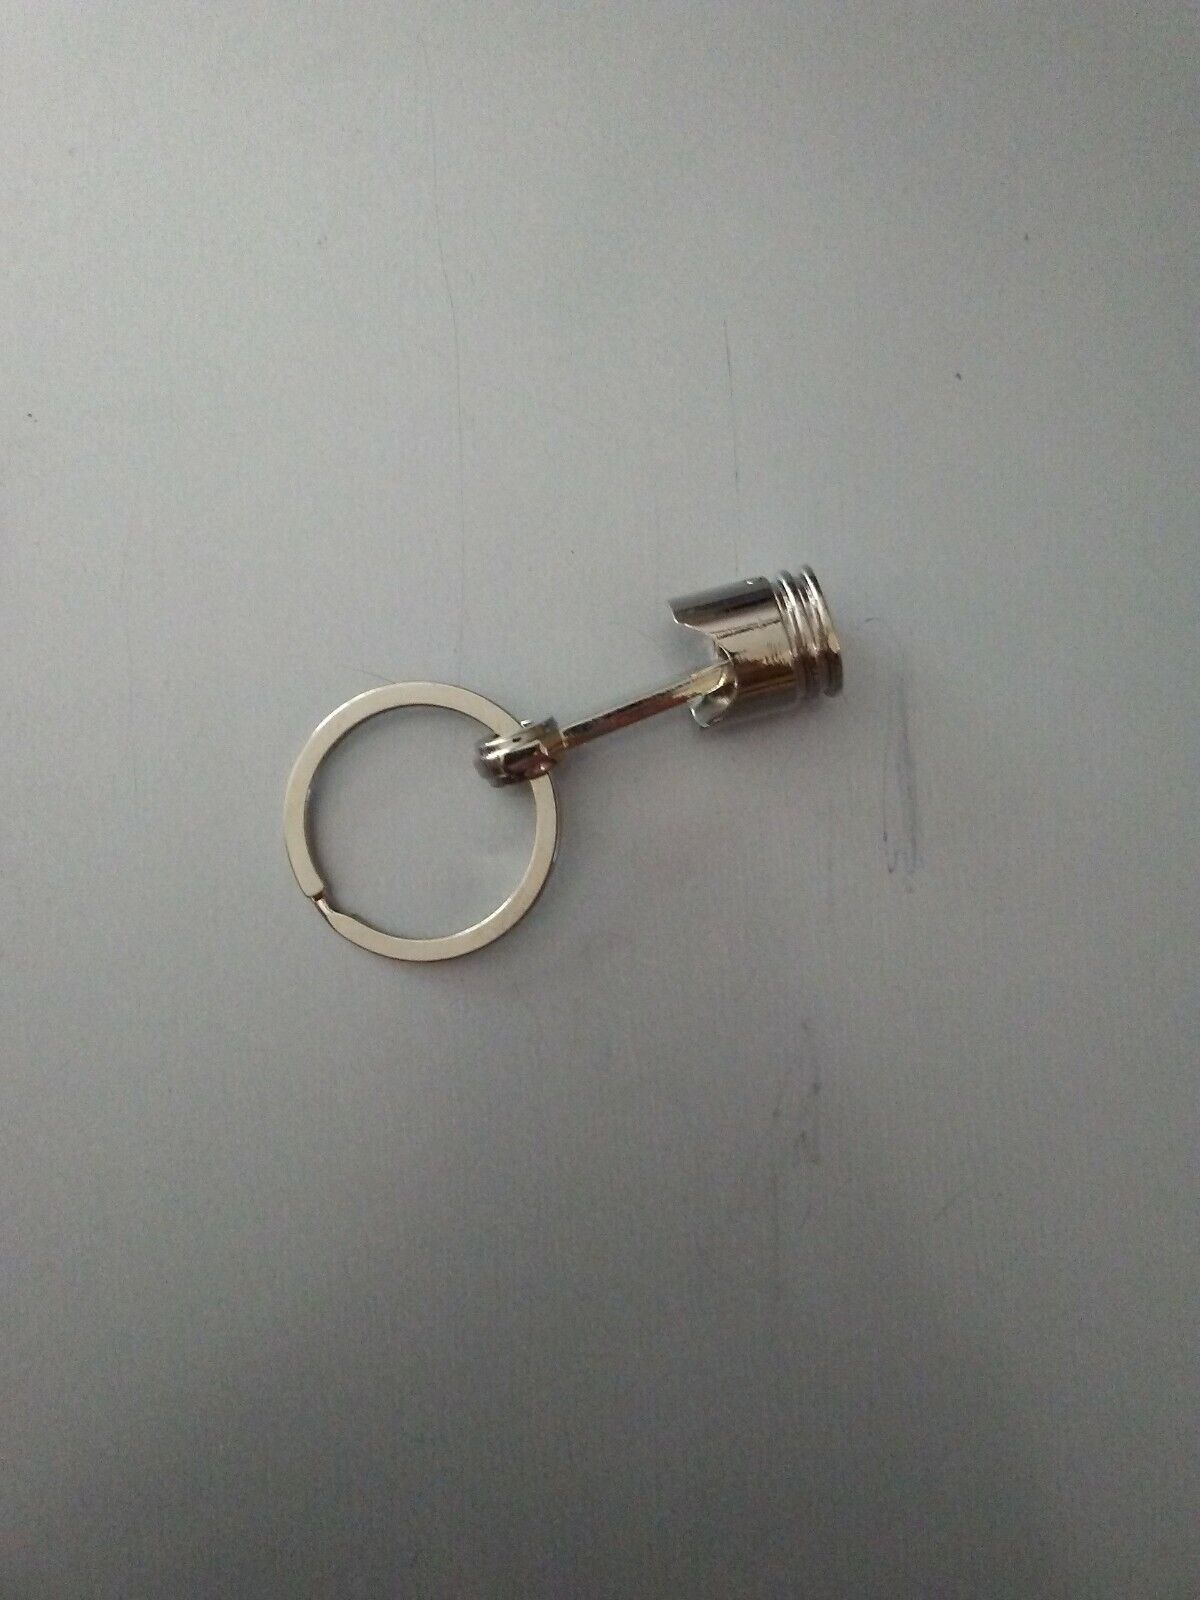 Engine Piston Keychain Actually moves